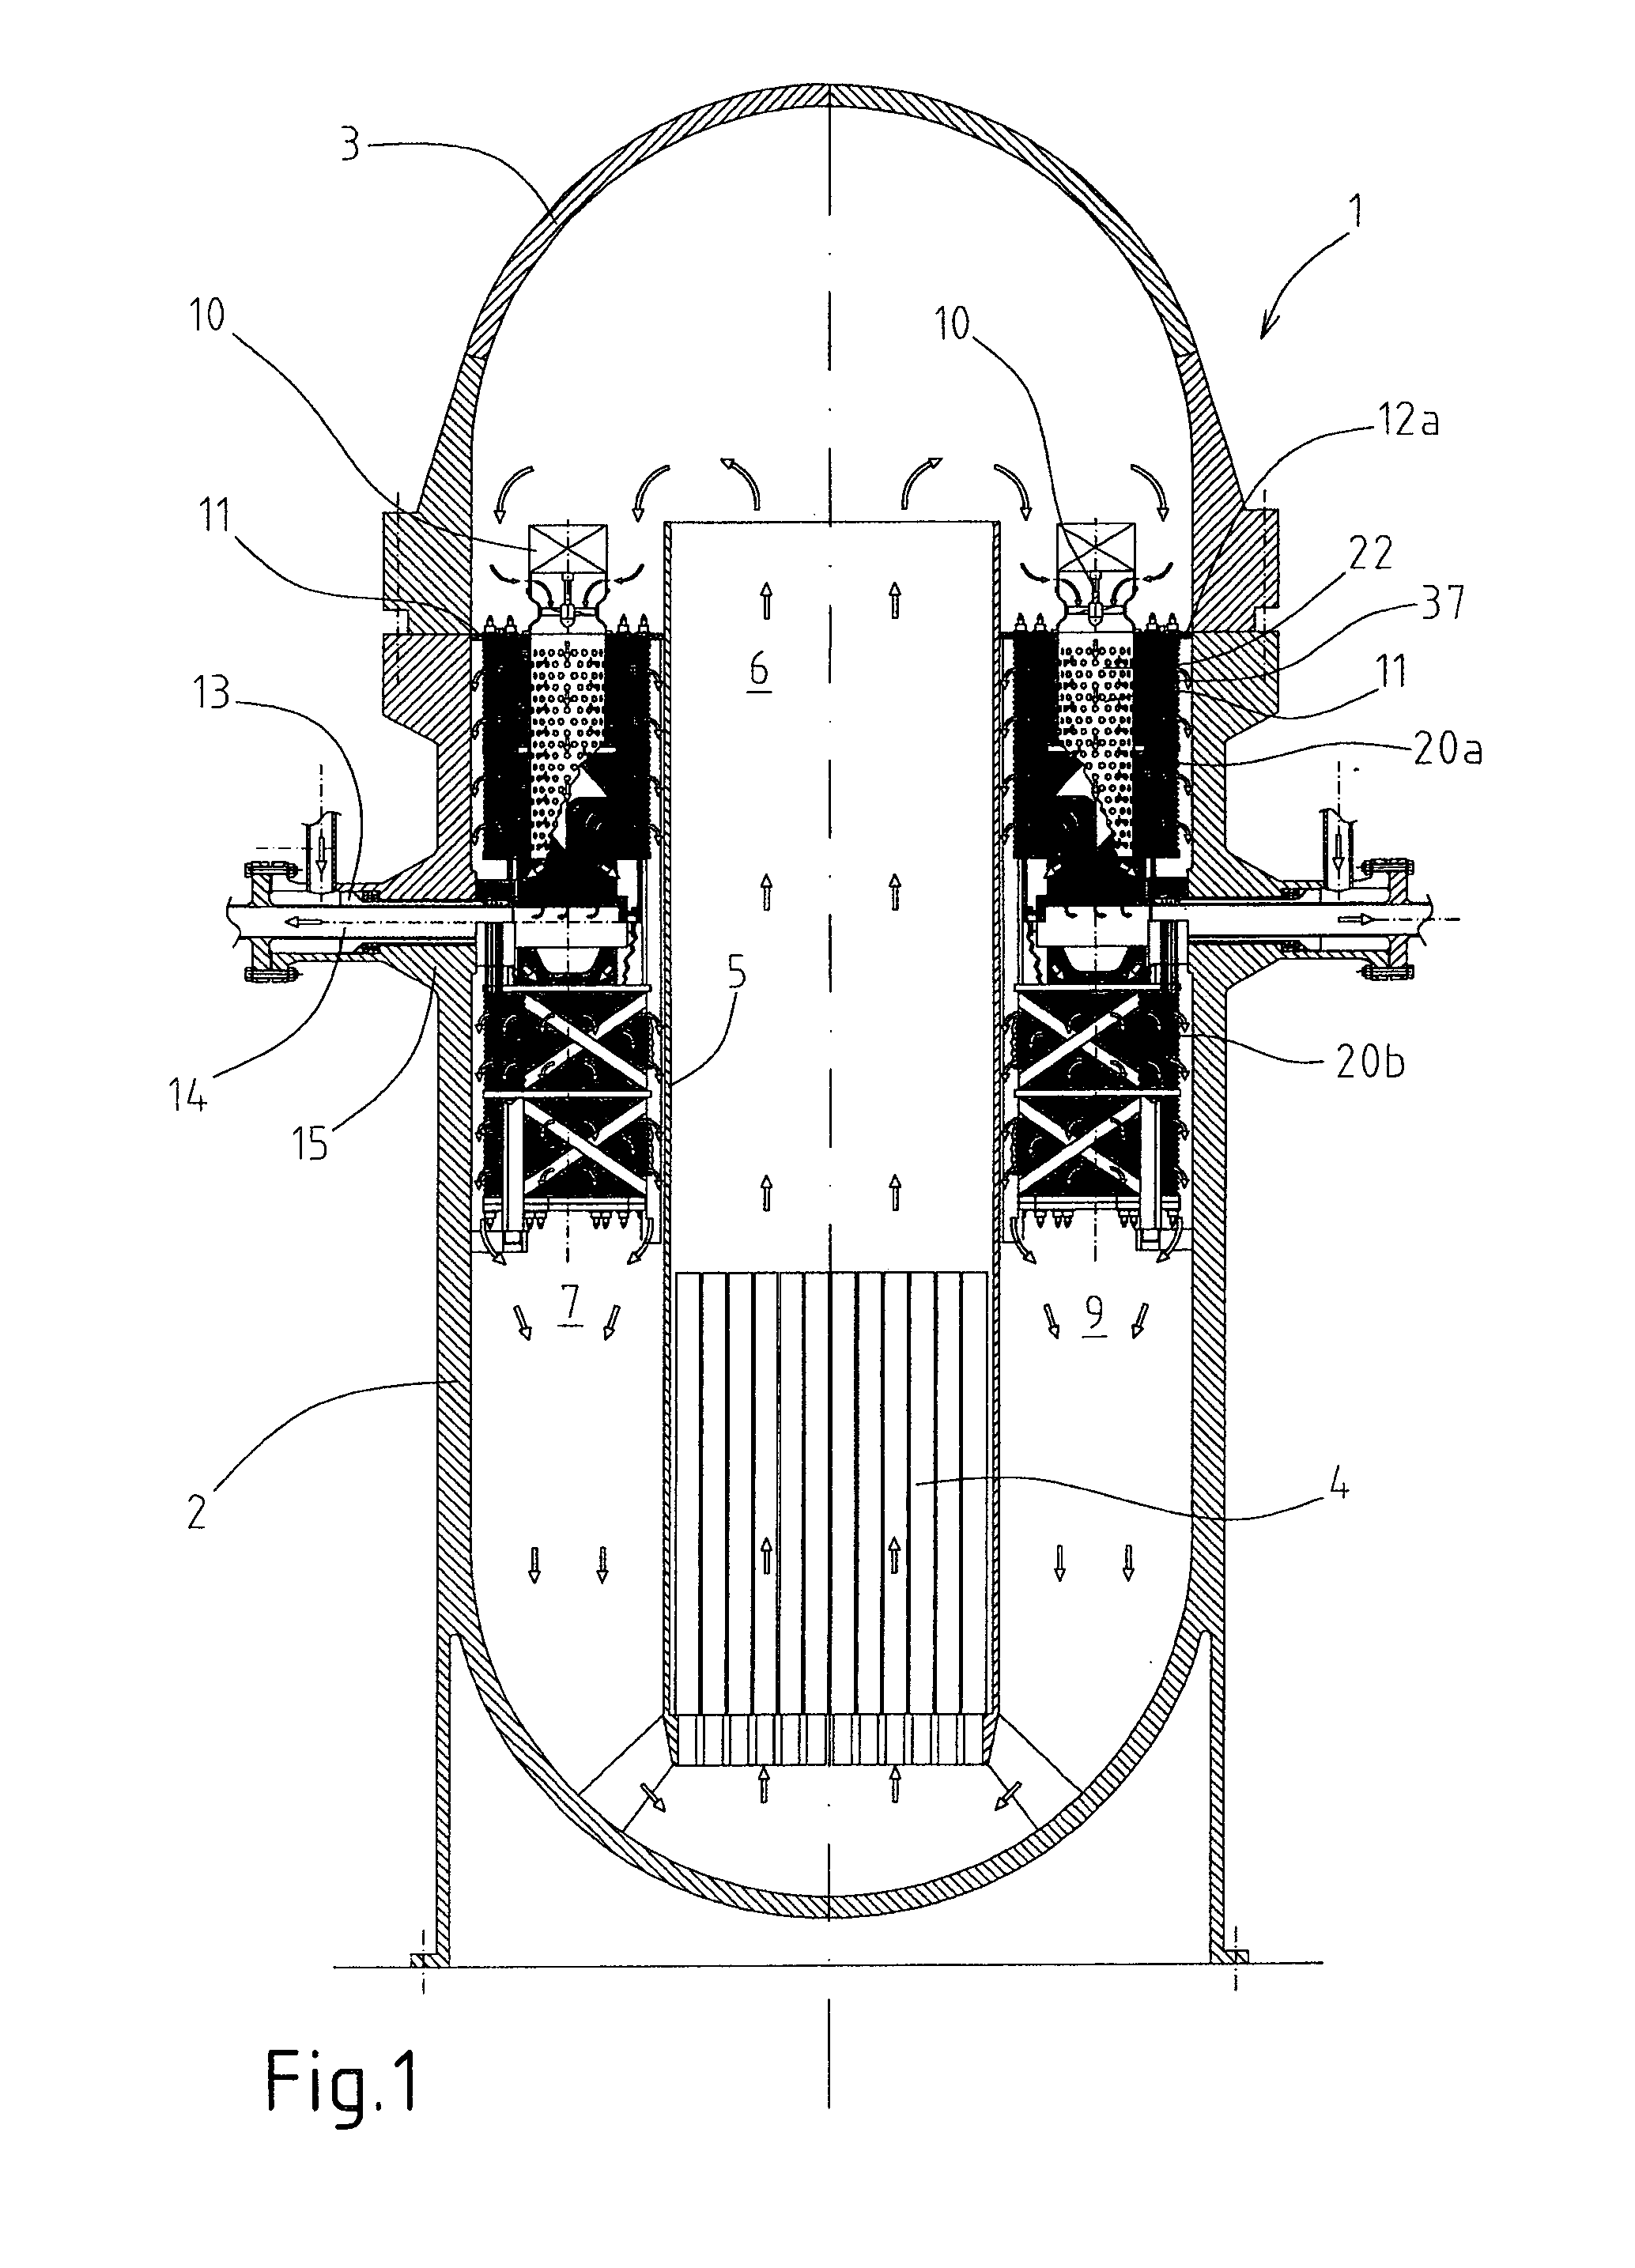 Pressurized-water-cooled nuclear reactor with compact steam generators